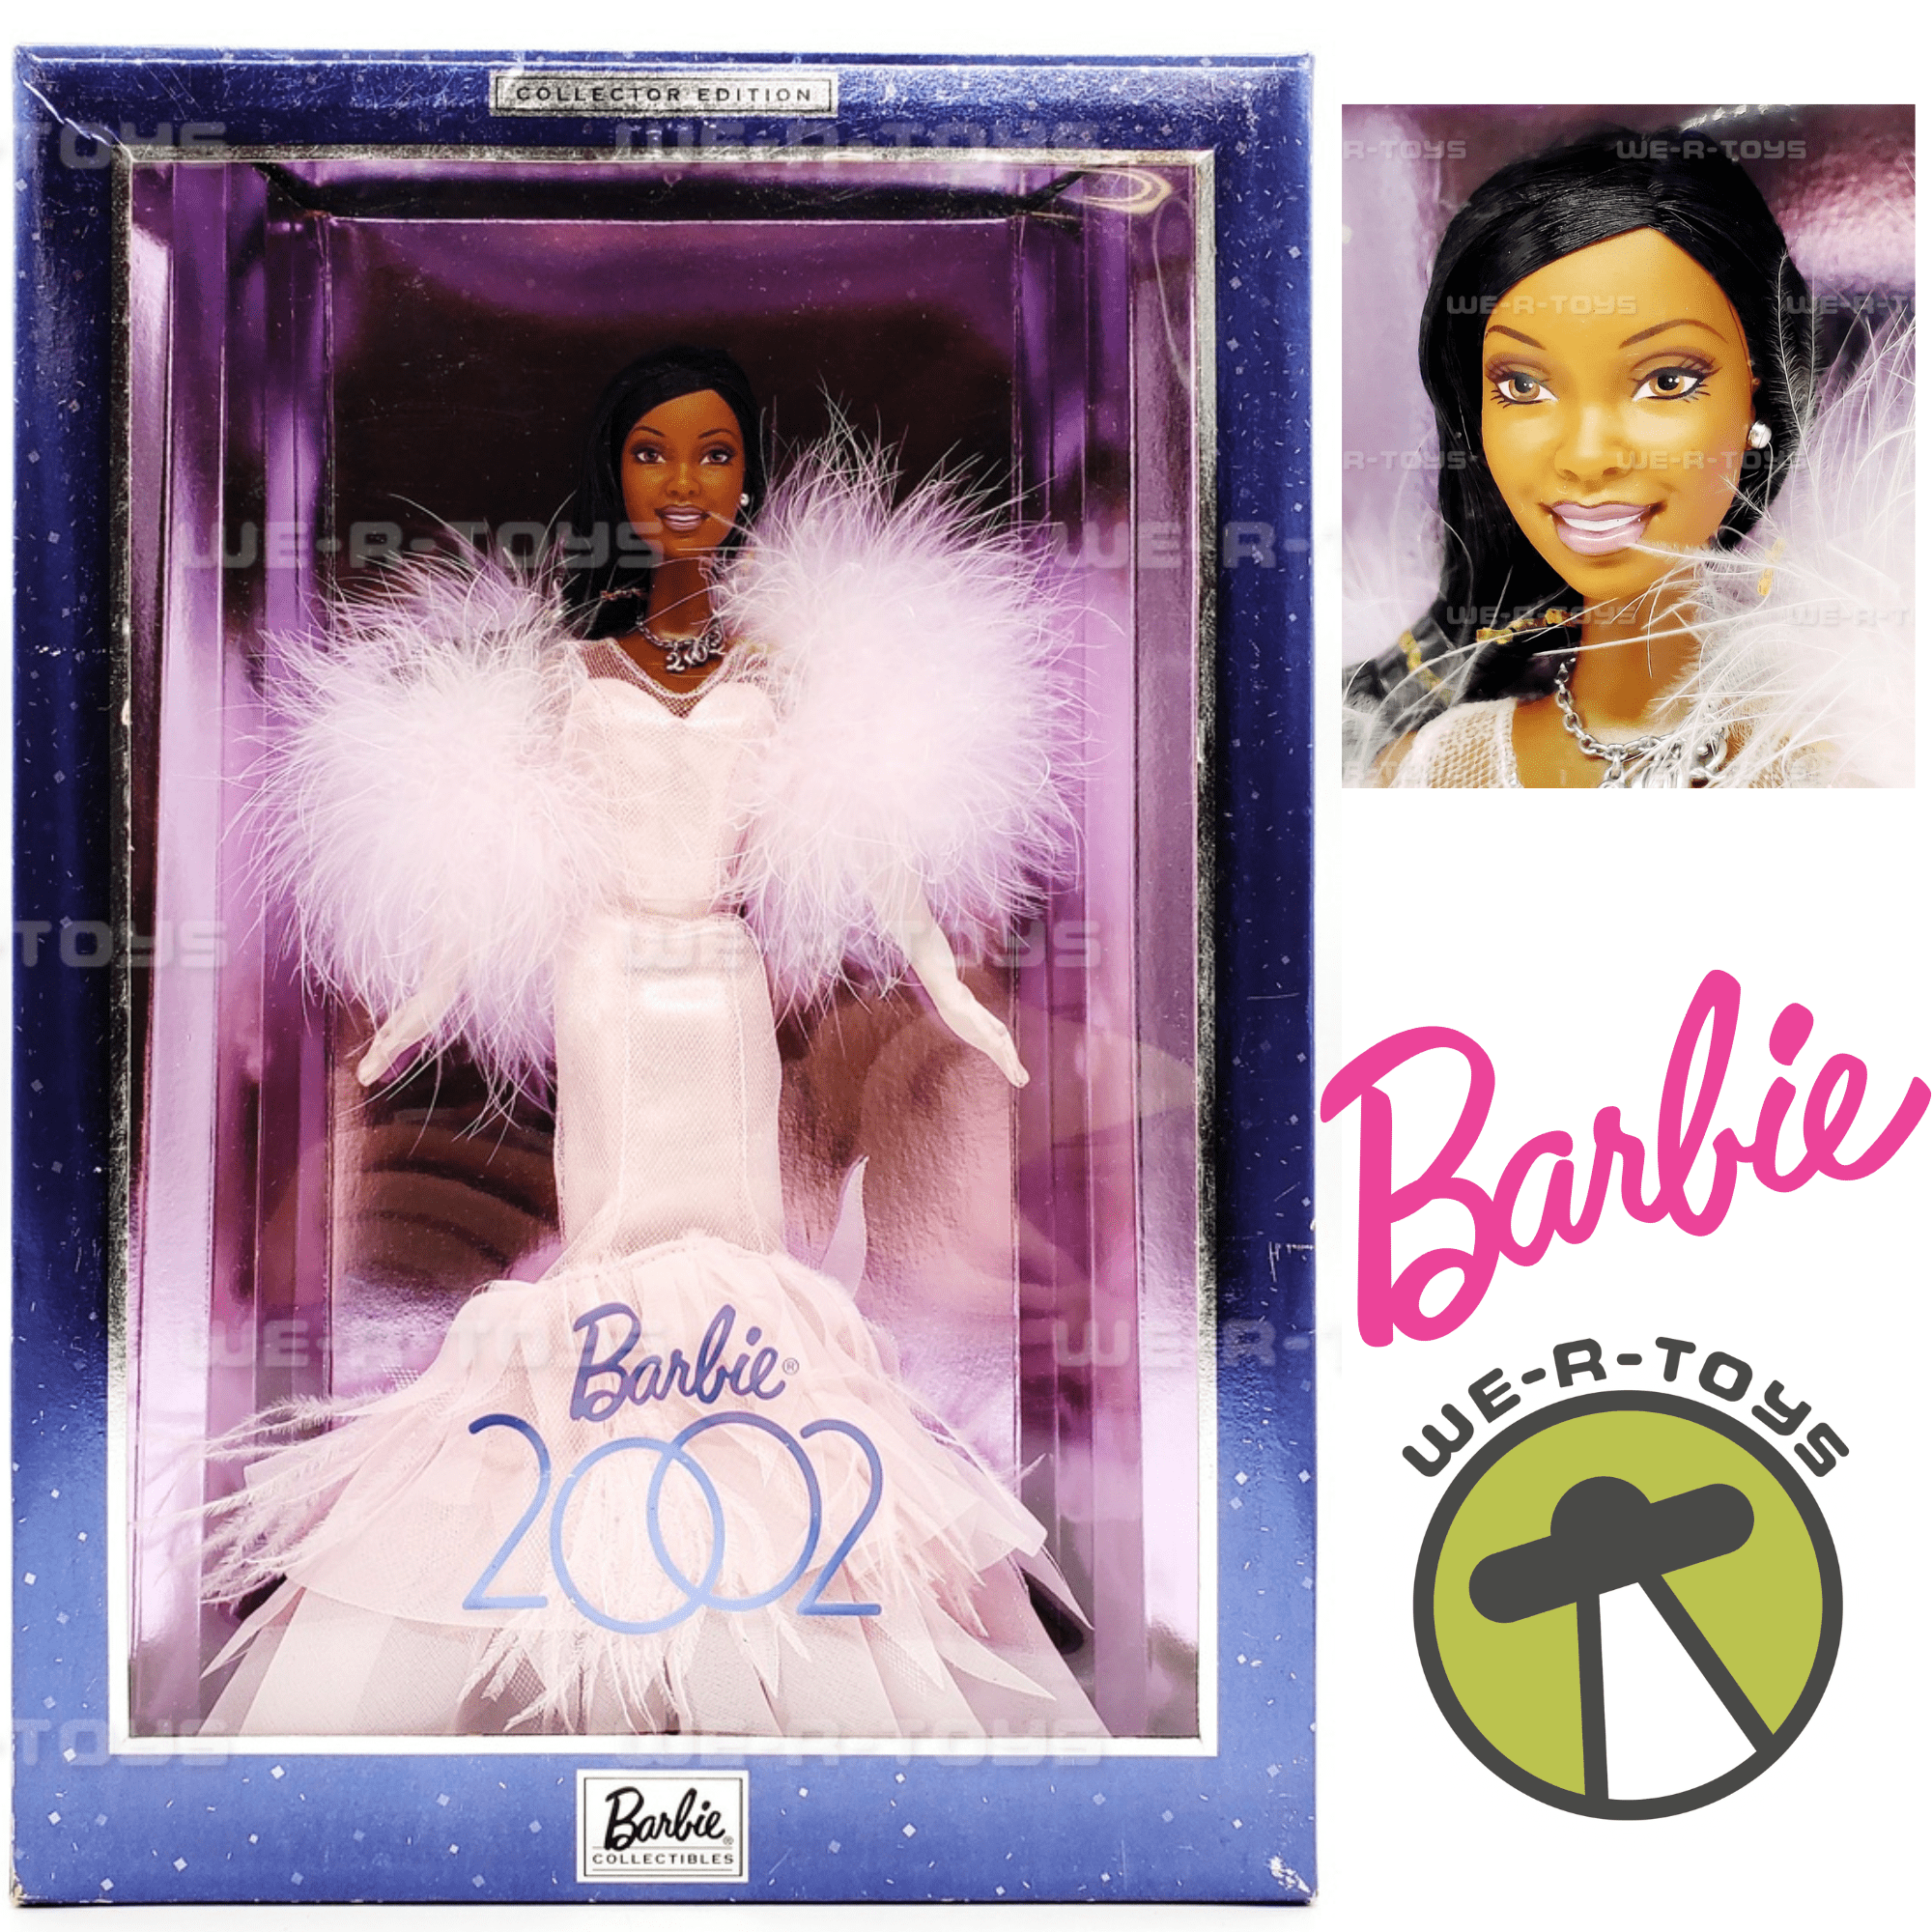 Barbie 2002 Doll Collector Edition African American Mattel 53976